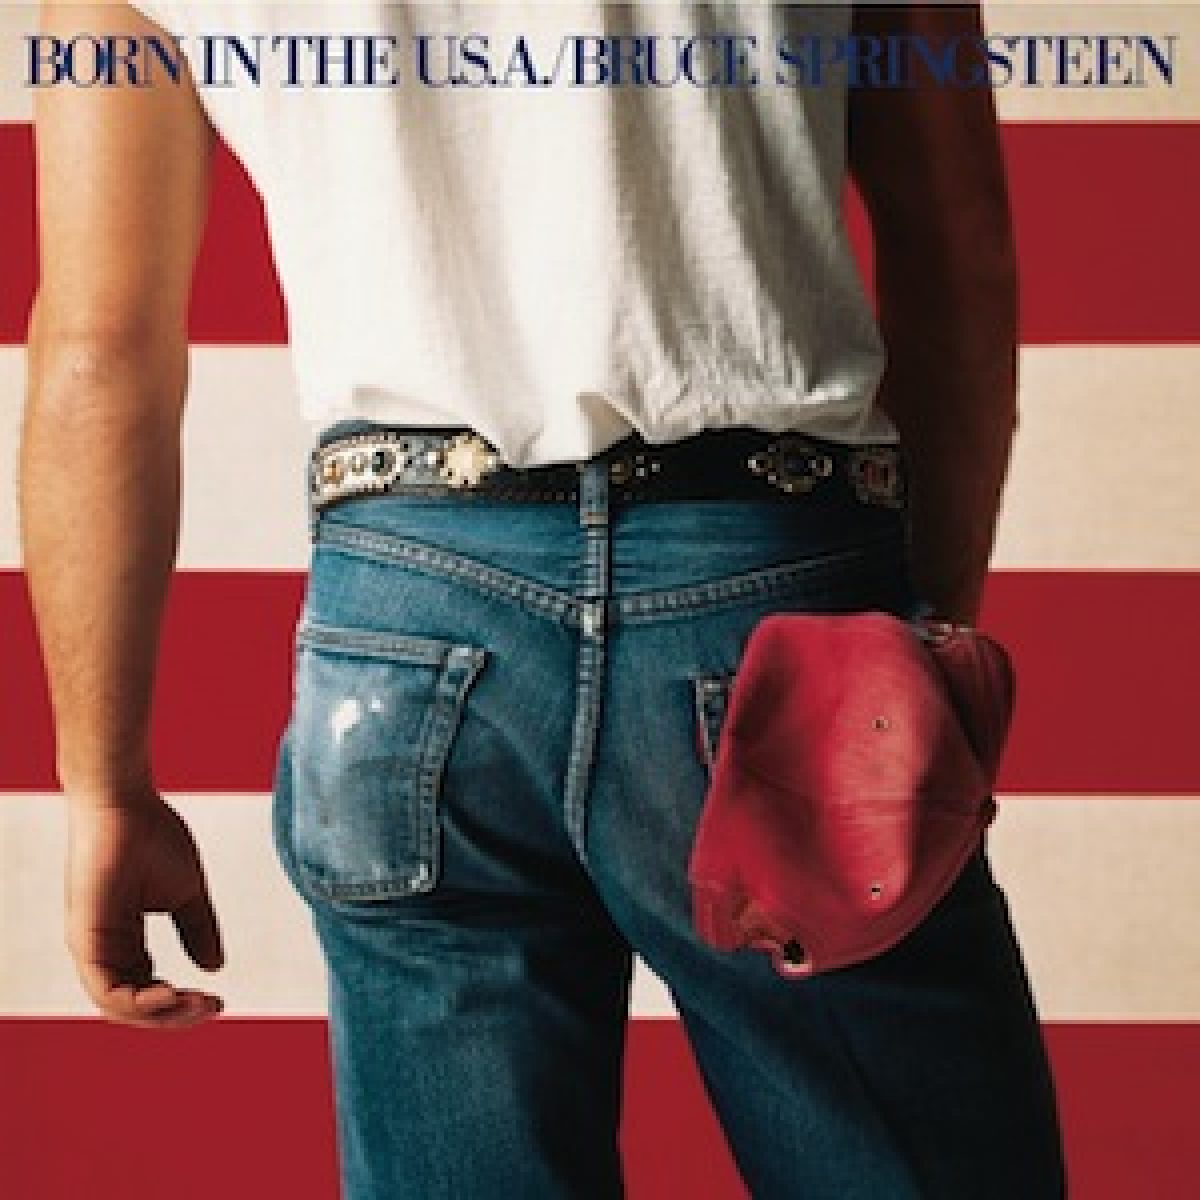 Bruce Springsteen, Born in the U.S.A.